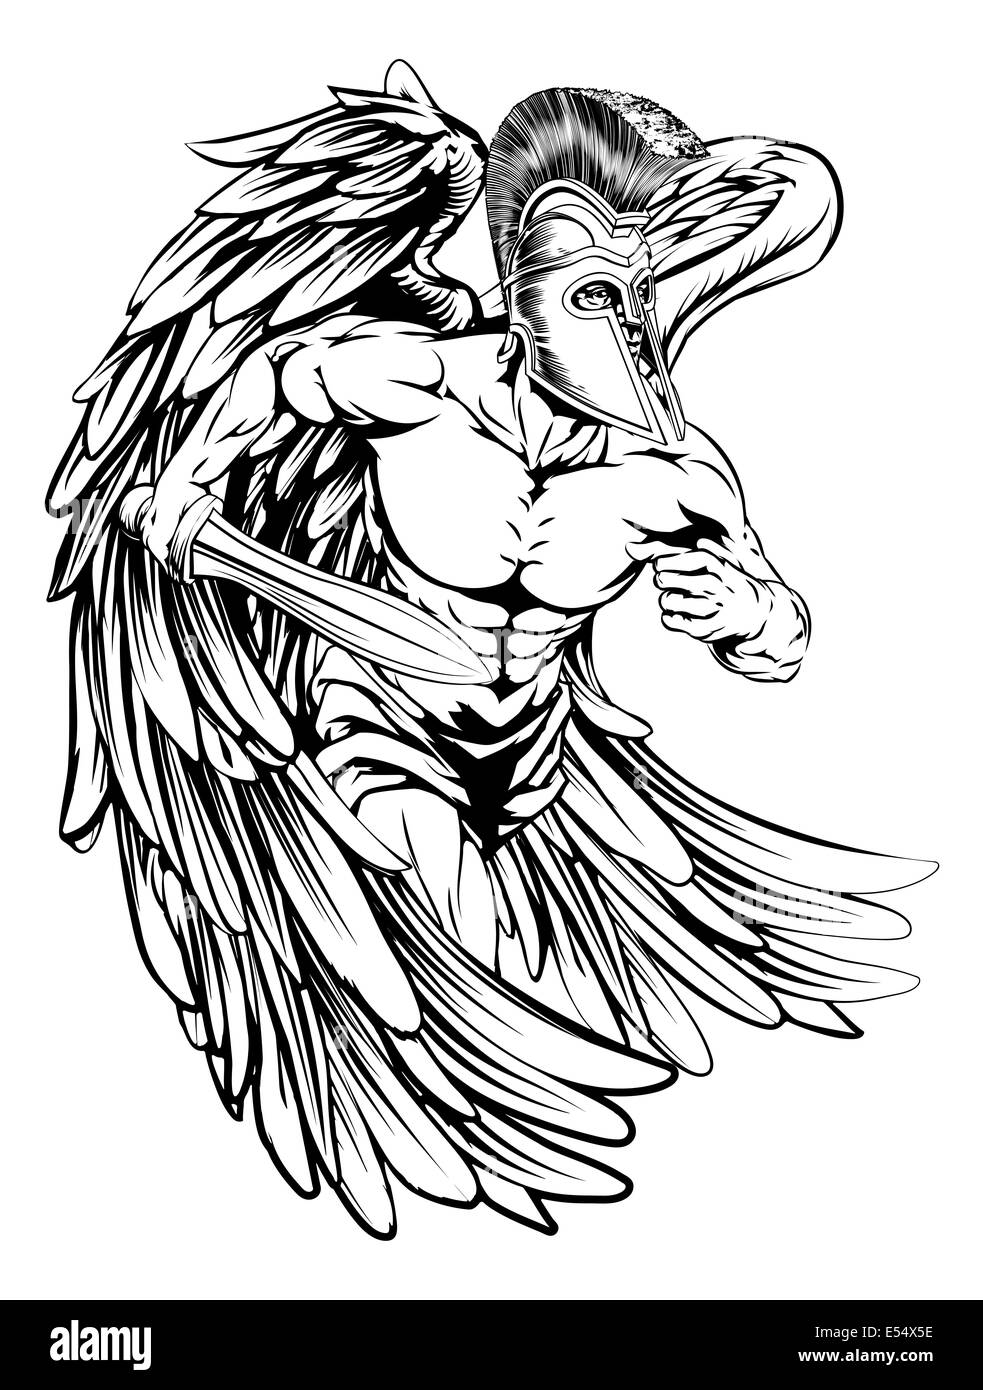 An illustration of a warrior angel character or sports mascot  in a trojan or Spartan style helmet holding a sword Stock Photo